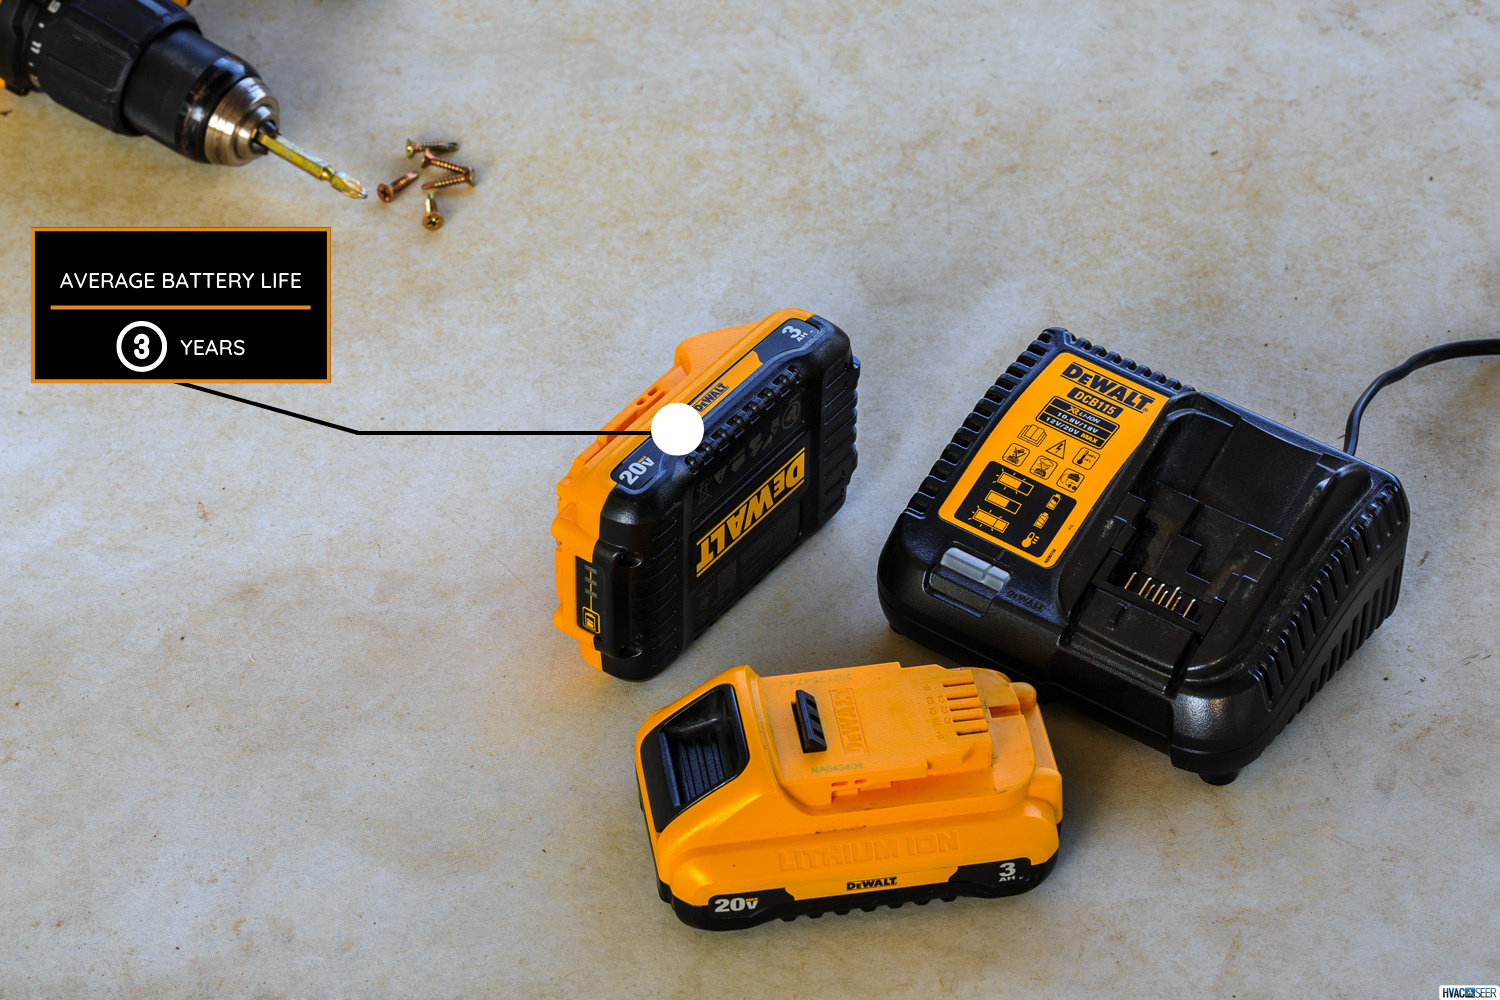 Dewalt battery charger and battery for Cordless drill-driver on Cement board background - How Long Does A DeWalt Battery Last